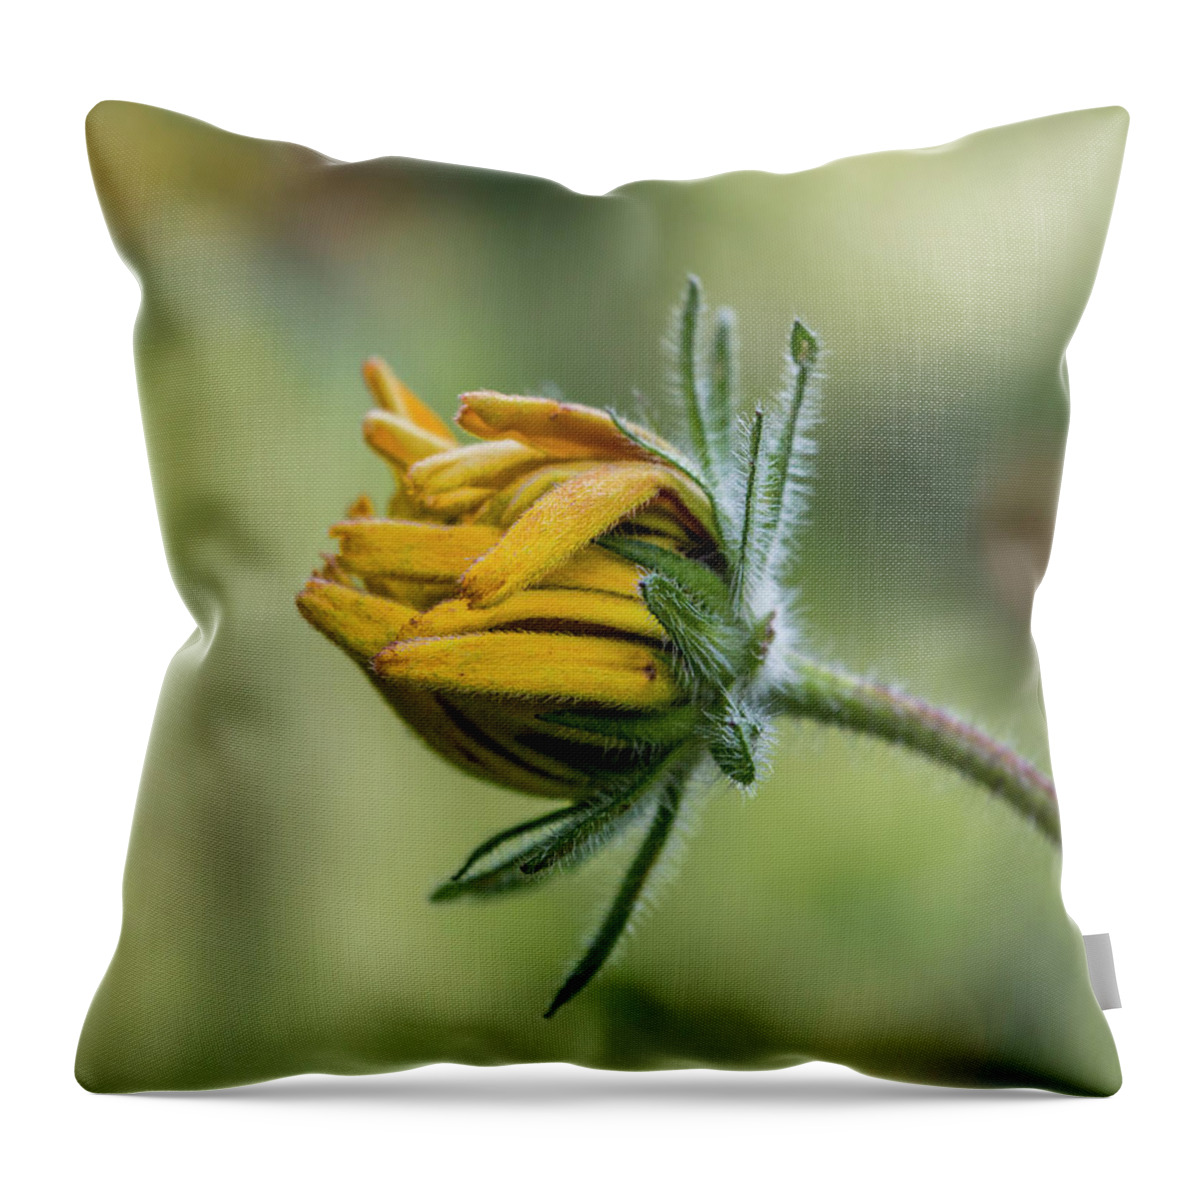 Rudbeckia Throw Pillow featuring the photograph Rudbeckia Fuzzy Bud by Patti Deters